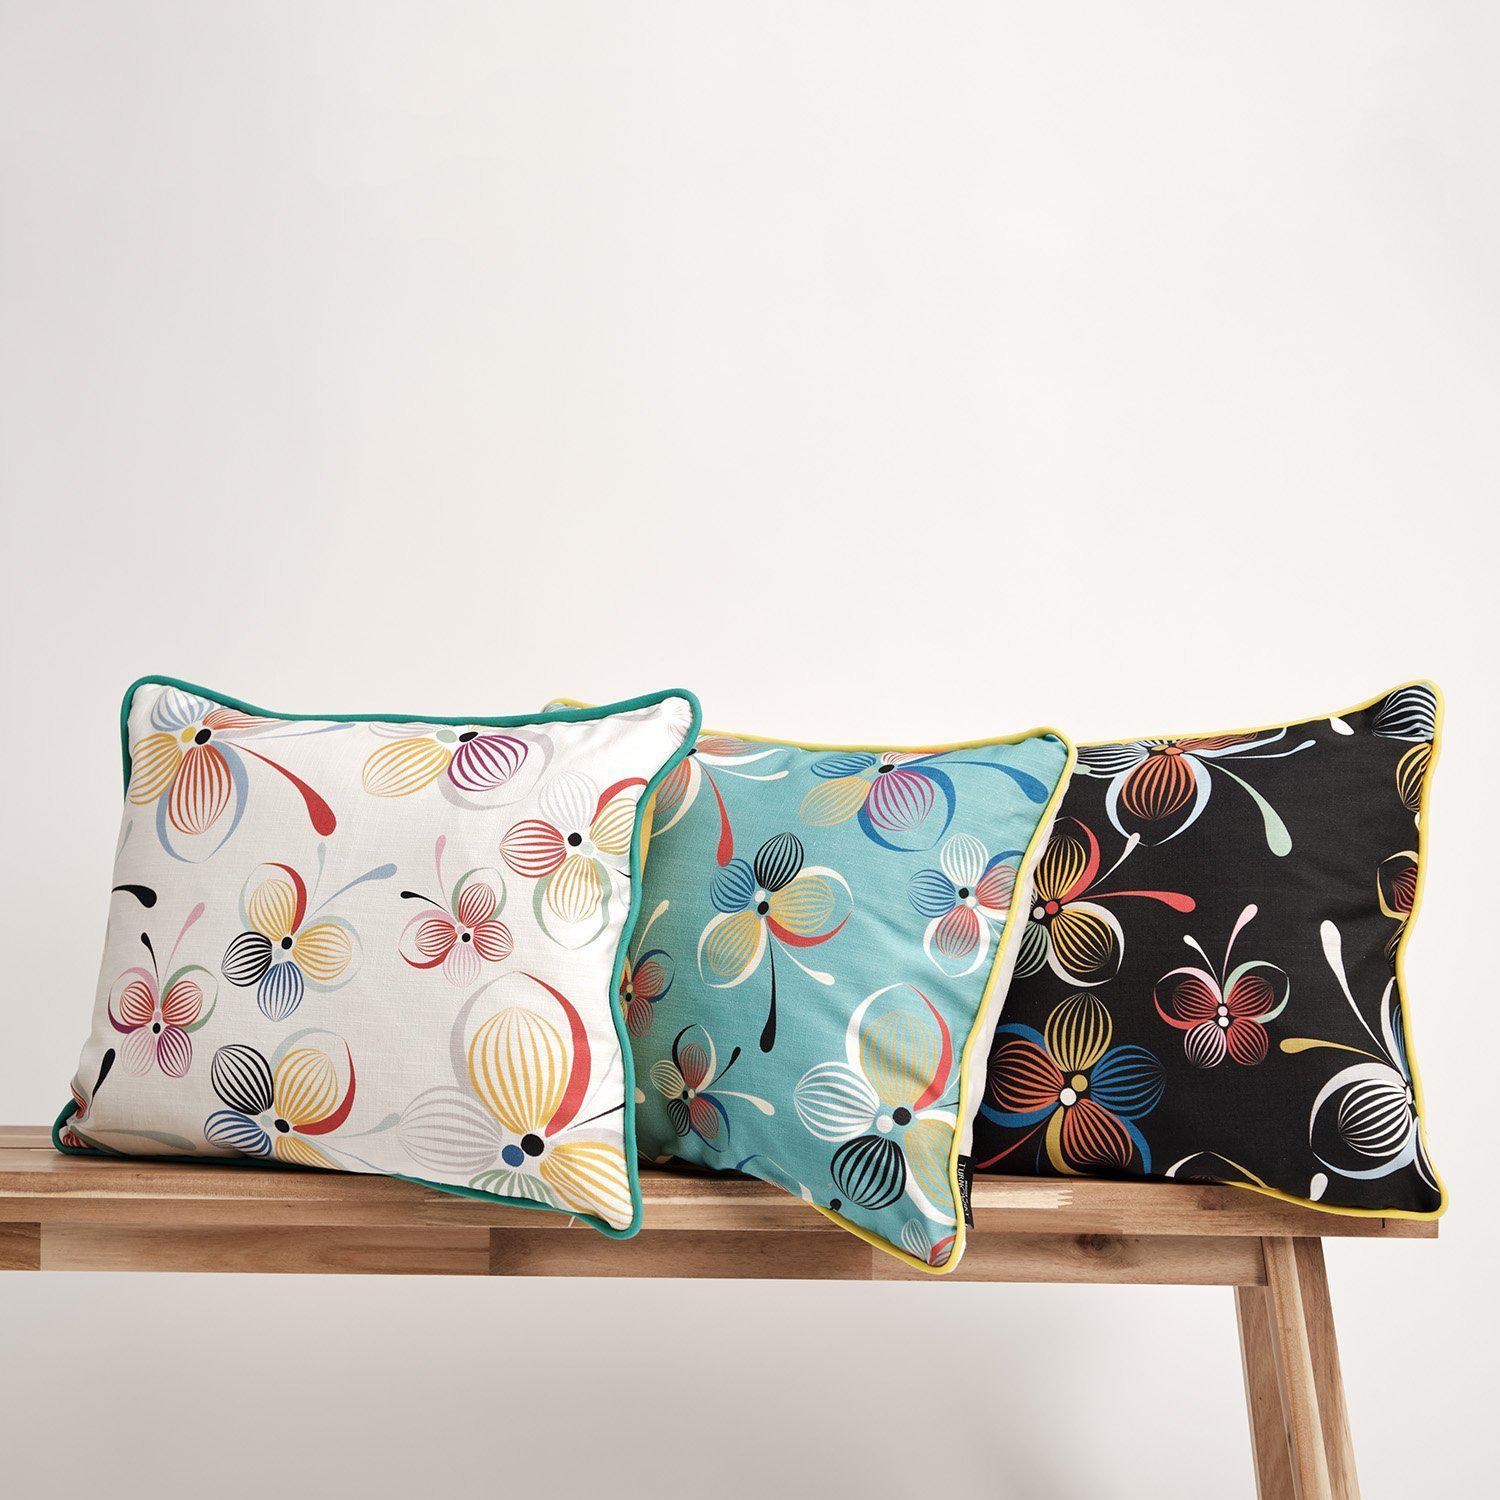 Bubbly Butterflies (Black) - Funky Art Cushion - Perfect Day - House Of Turnowsky Pillows - Handmade Cushions UK - WeLoveCushions